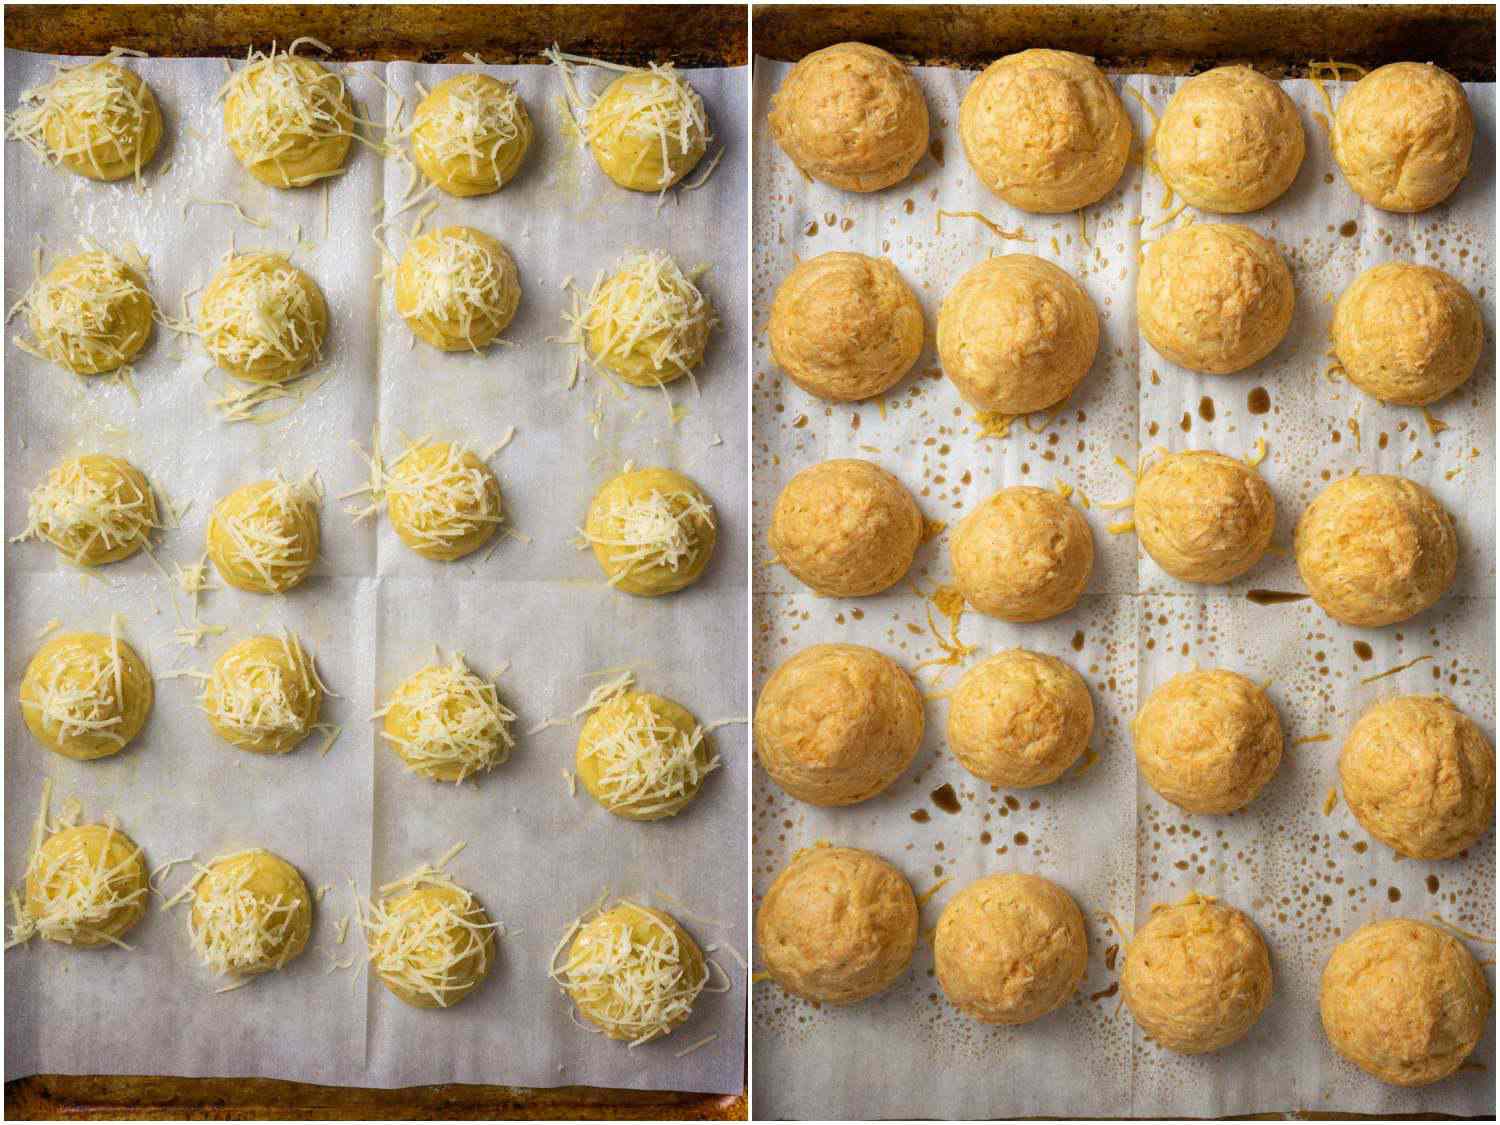 Split image of the gougères before and after baking.